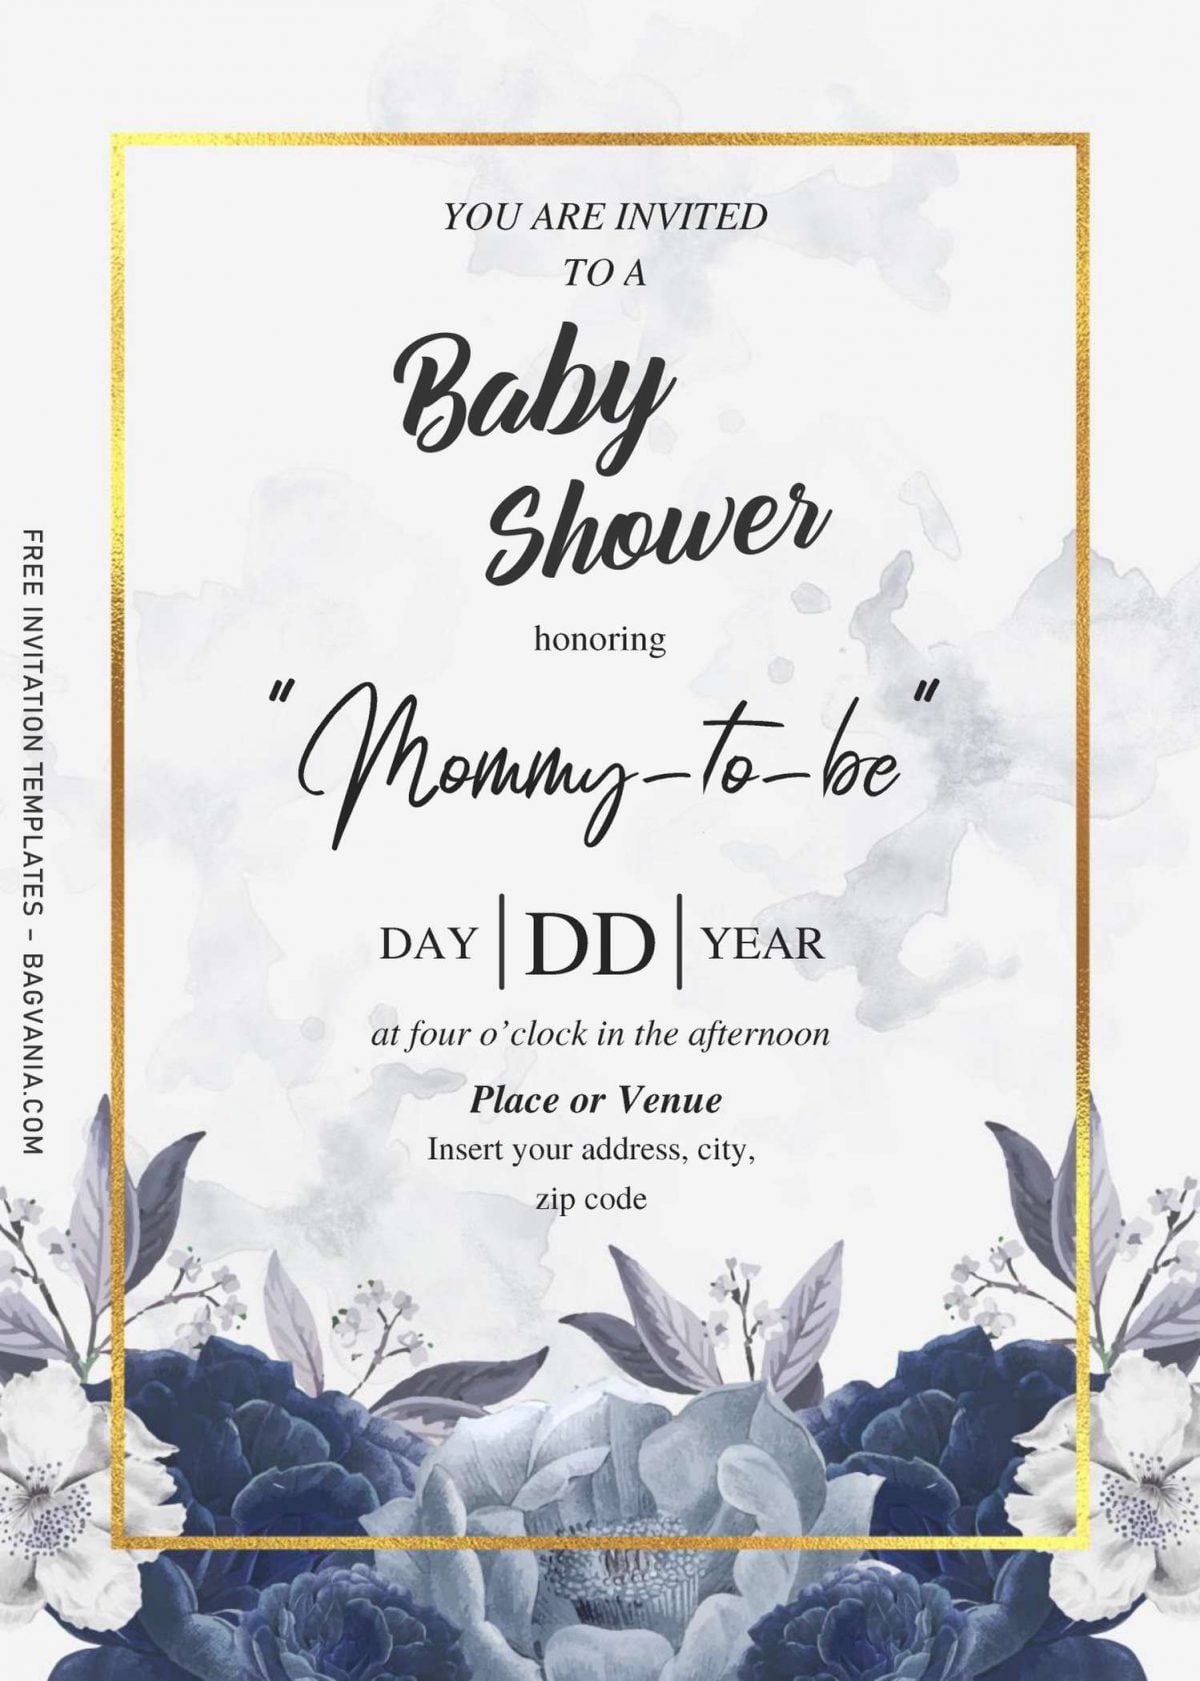 Dusty Blue Rose Baby Shower Invitation Templates - Editable With MS Word and has elegant typography